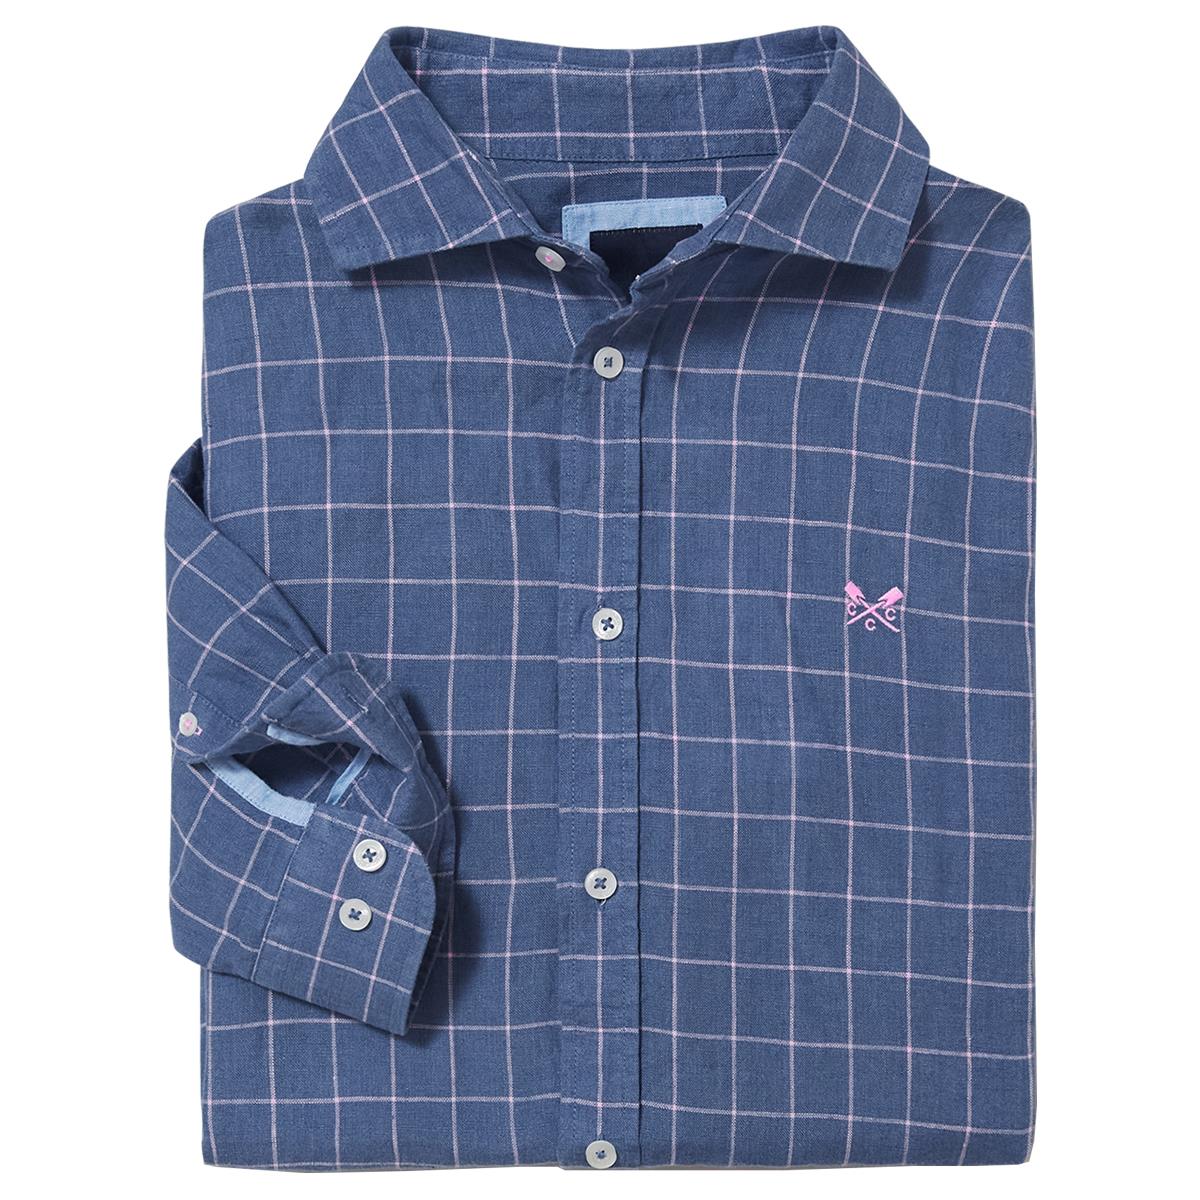 Classic linen shirt with a stylish grid check design.